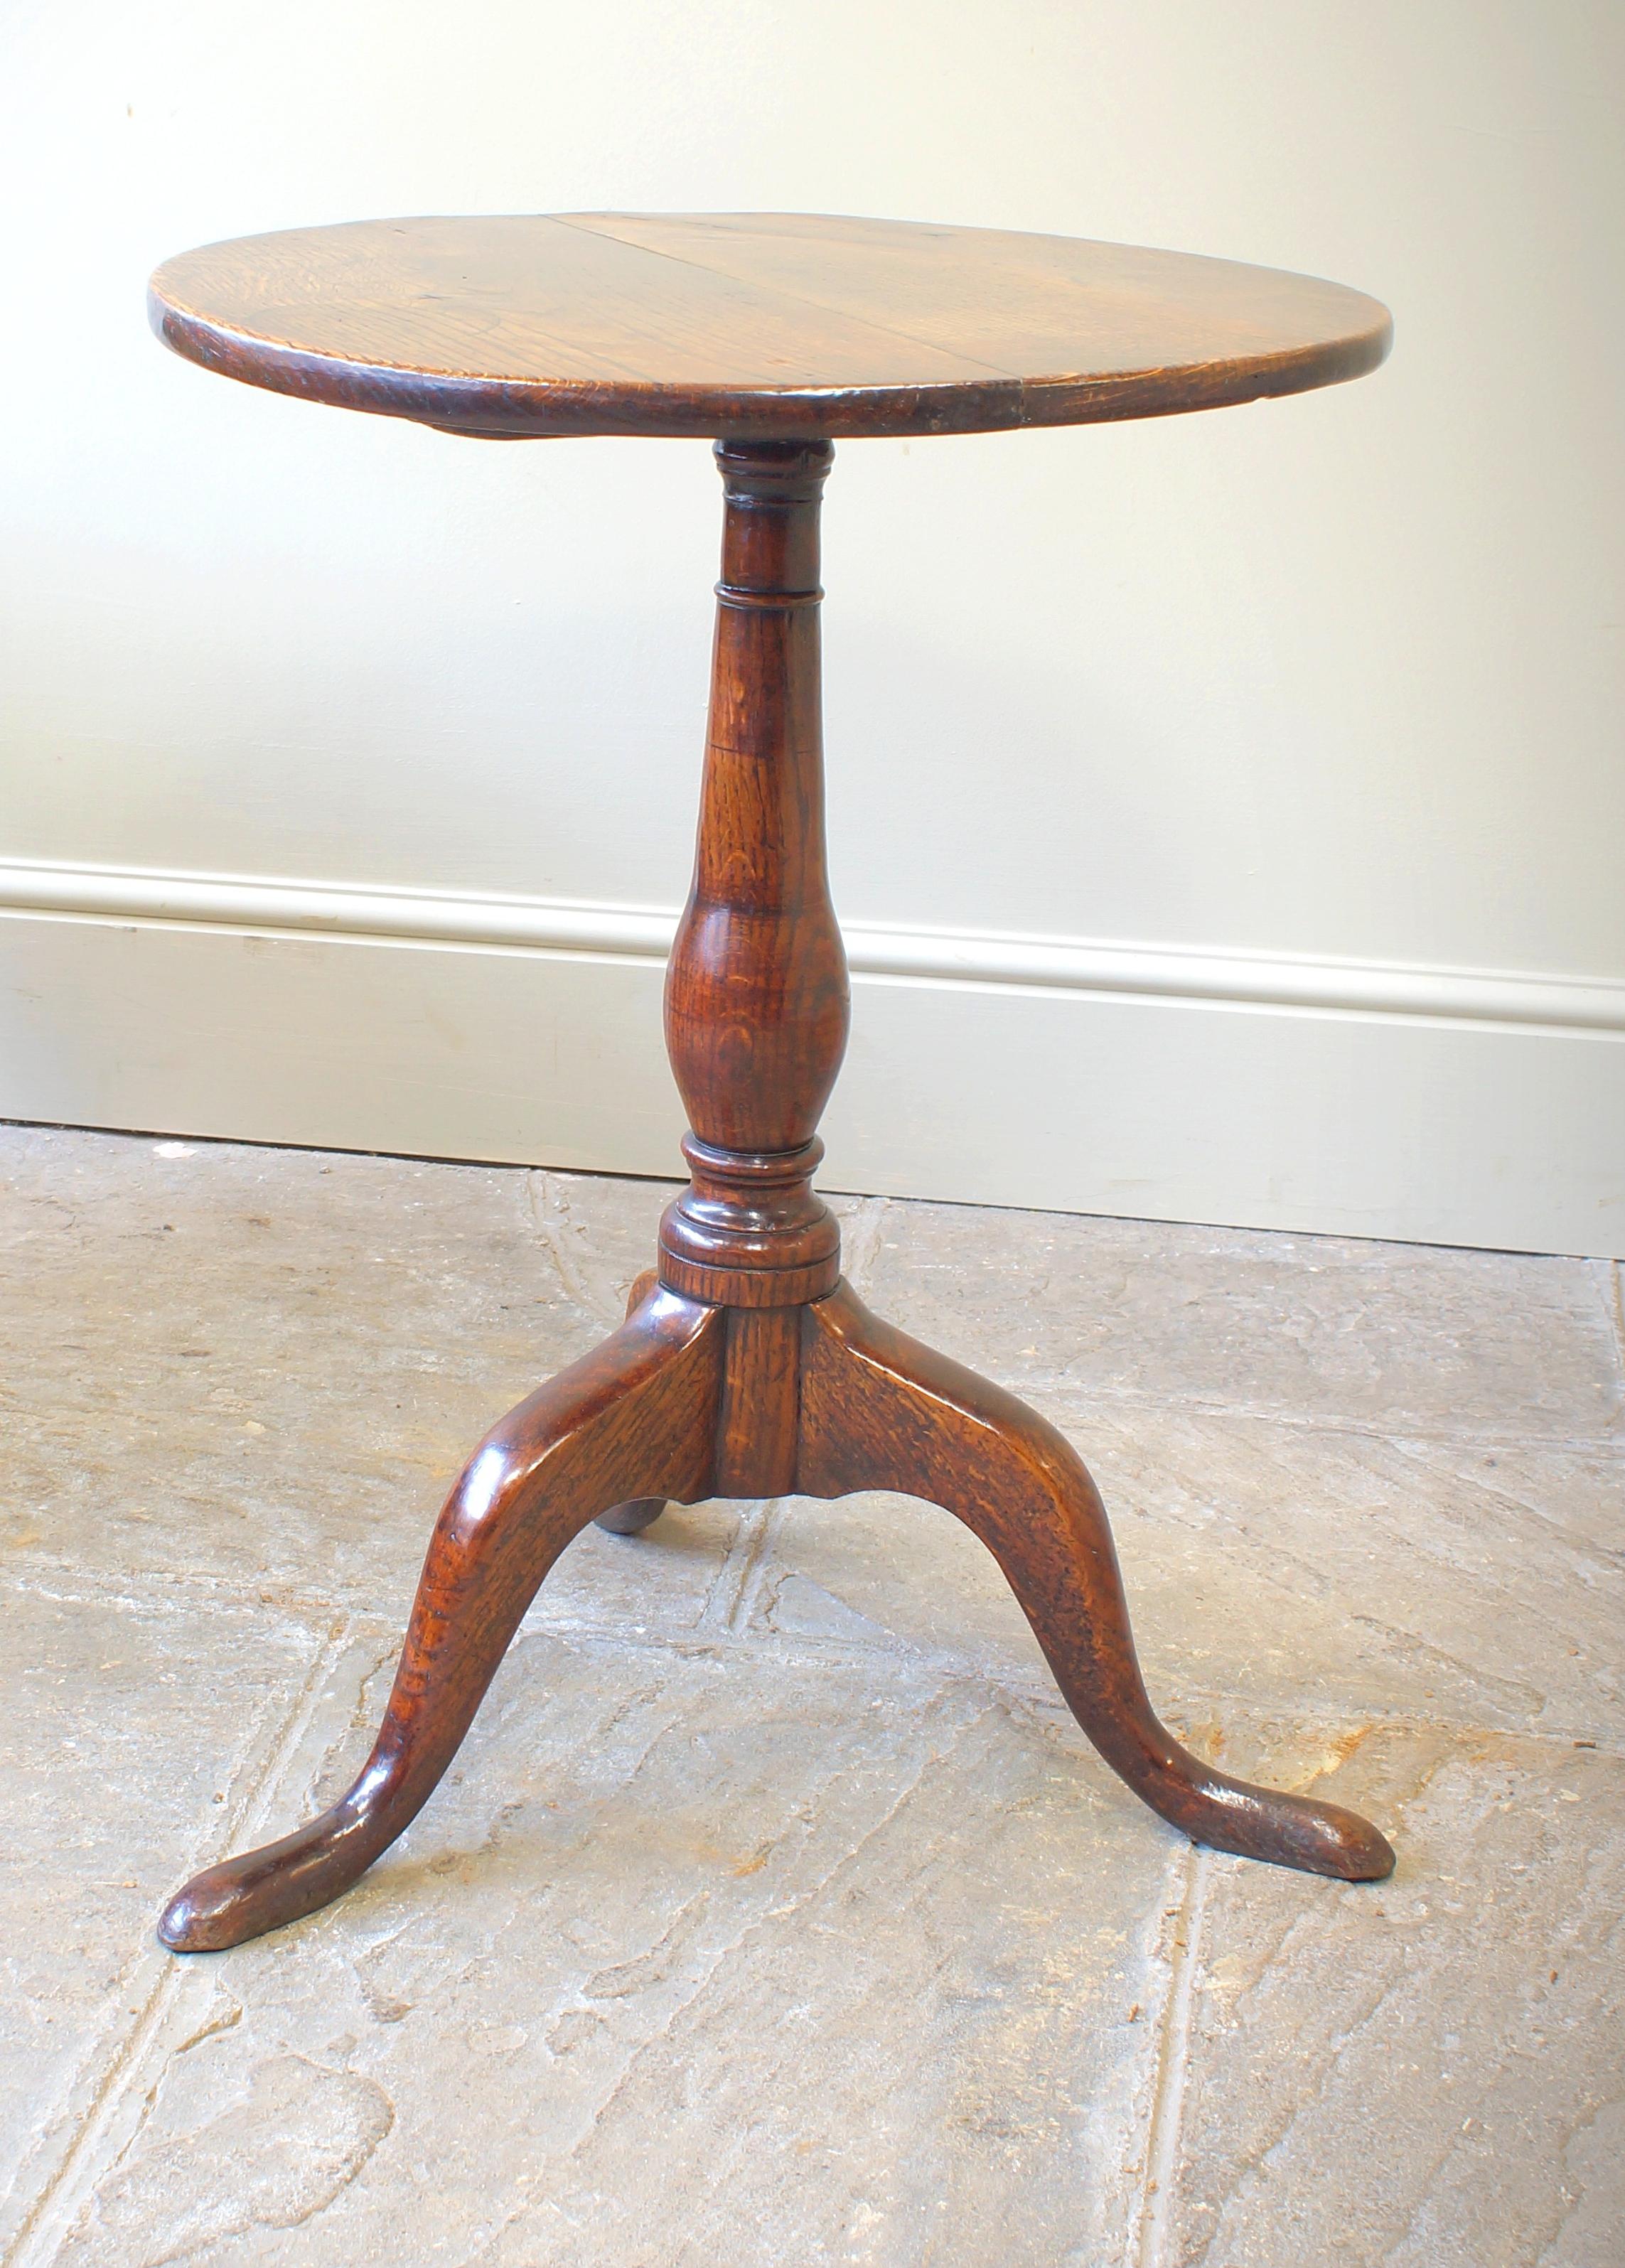 18th Century oak wine/ tripod table with a matched two piece top supported on an elegant turned column terminating with three shaped legs. Circa 1780.
Excellent colour and condition having no breaks or repairs.
Please don't hesitate to contact us